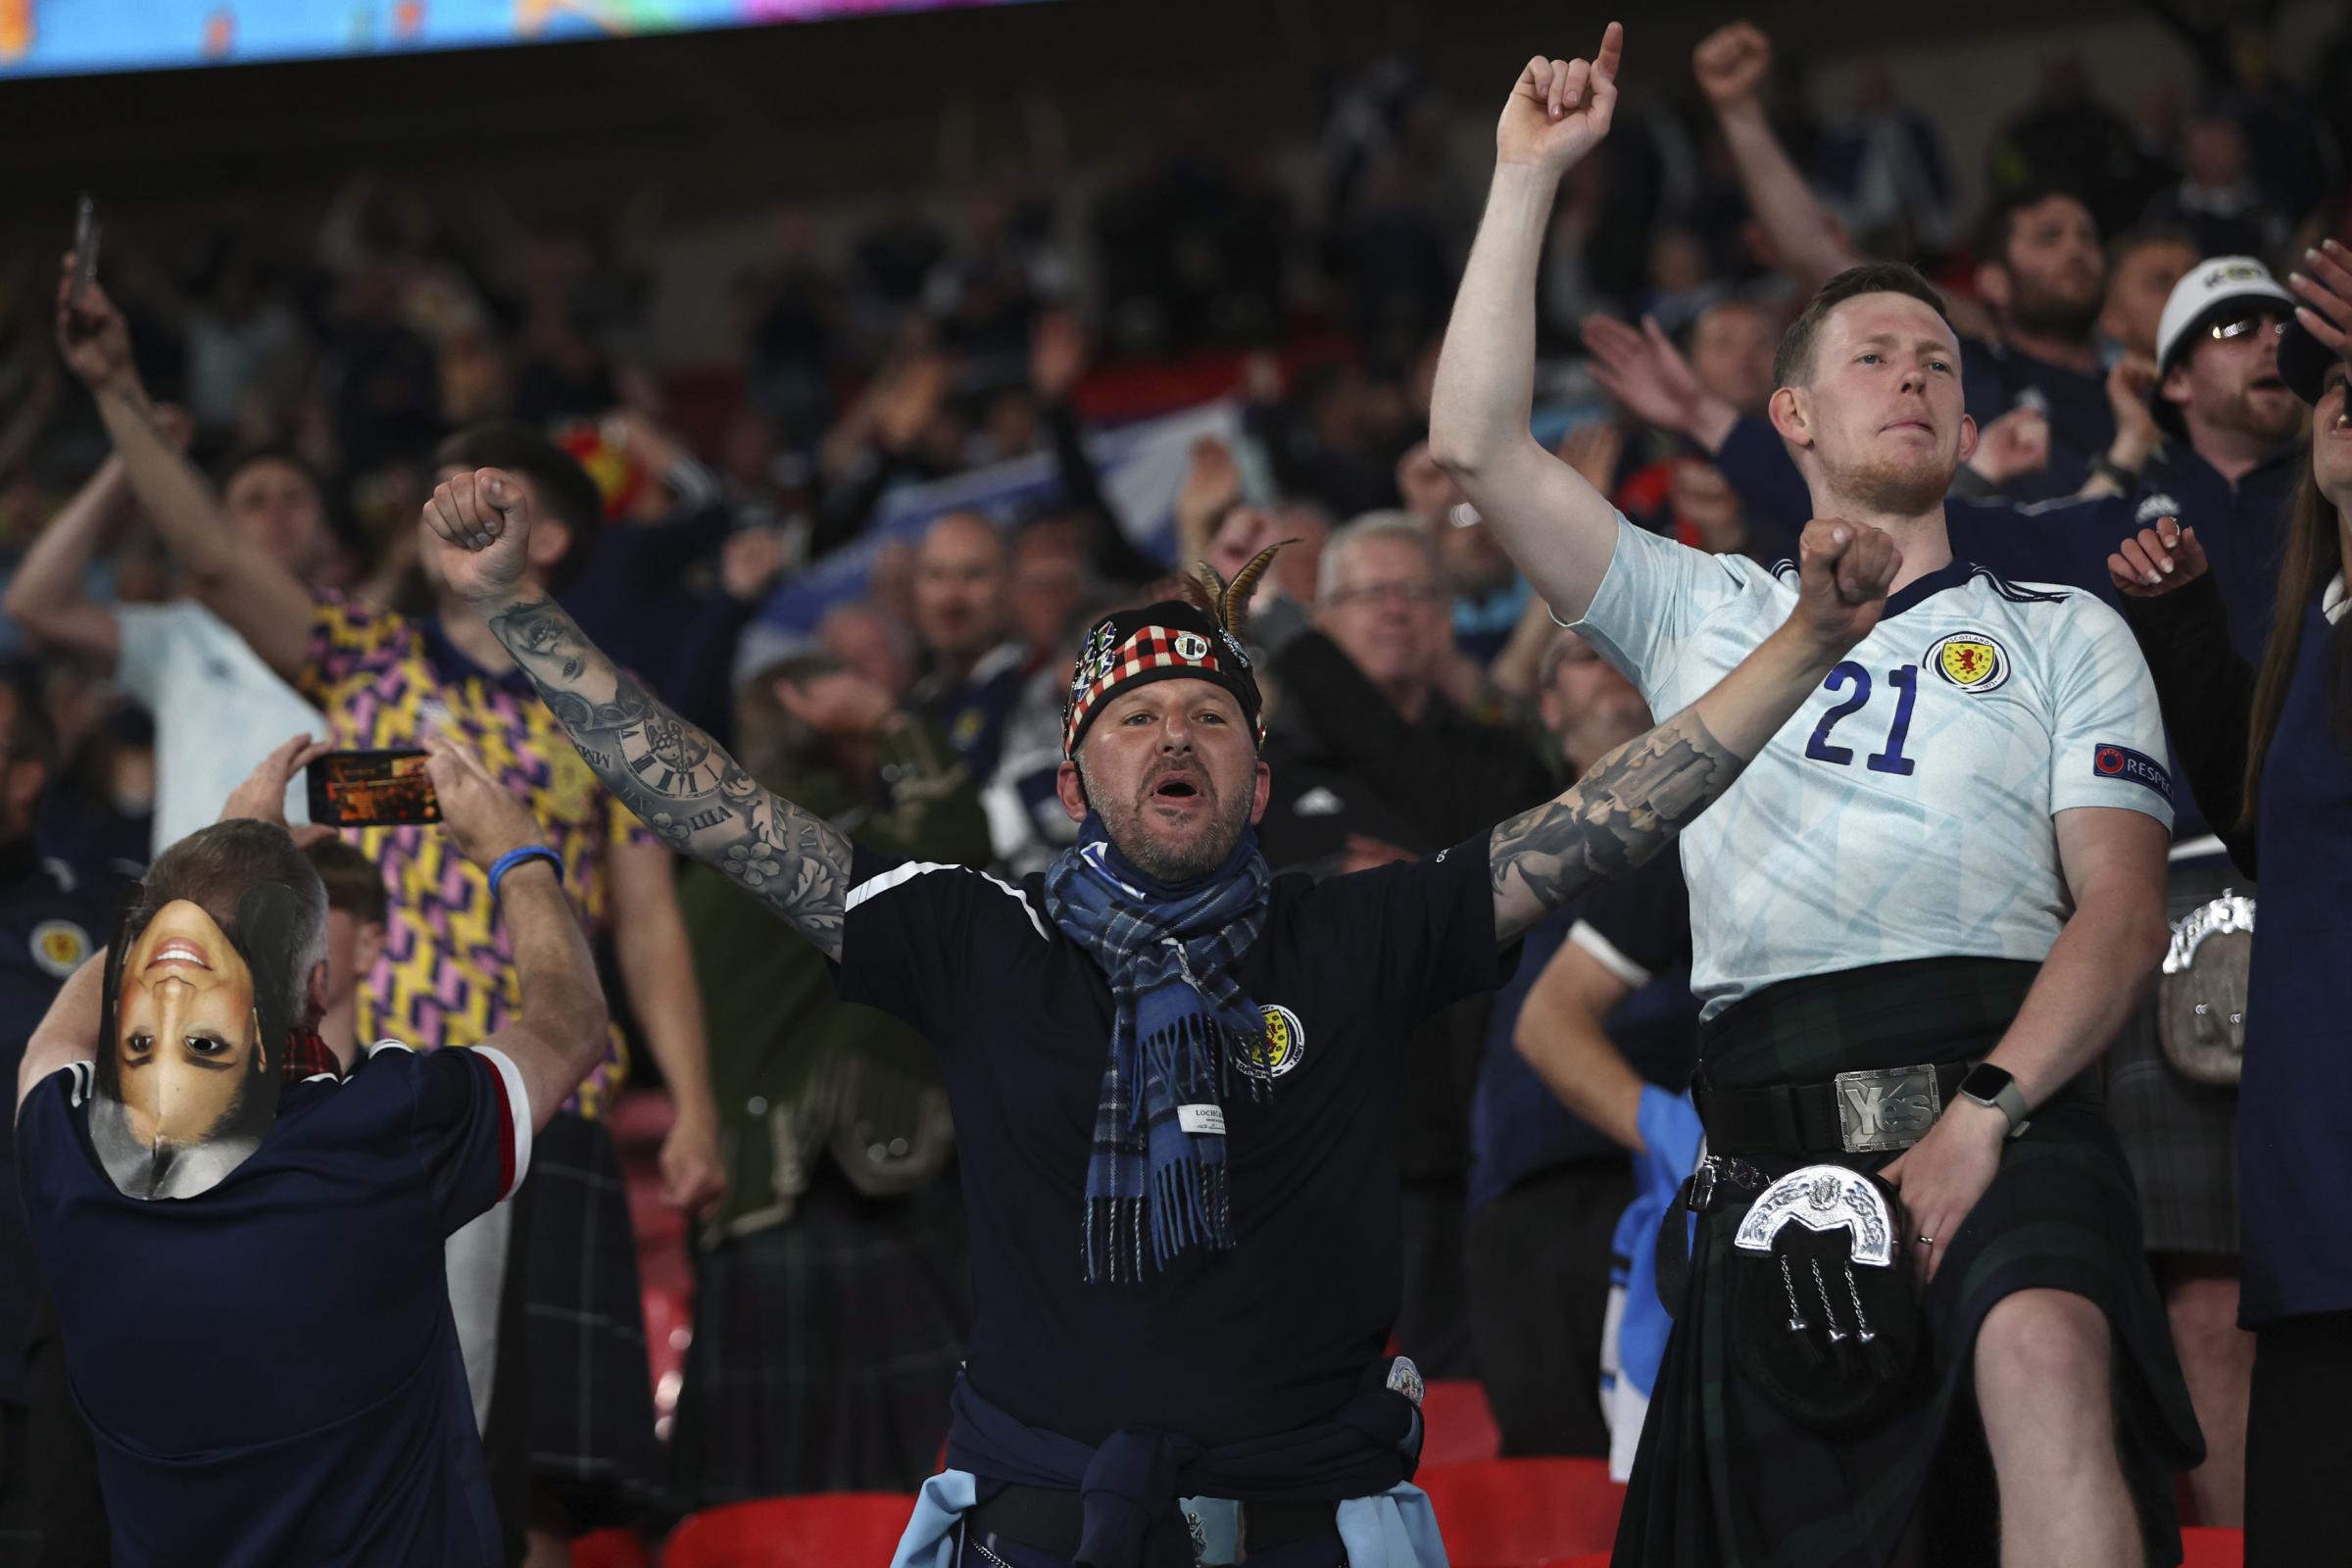 Scotland supporters celebrate at the end of the Euro 2020 soccer championship group D match between England and Scotland at Wembley stadium in London, Friday, June 18, 2021. (Carl Recine/Pool Photo via AP).